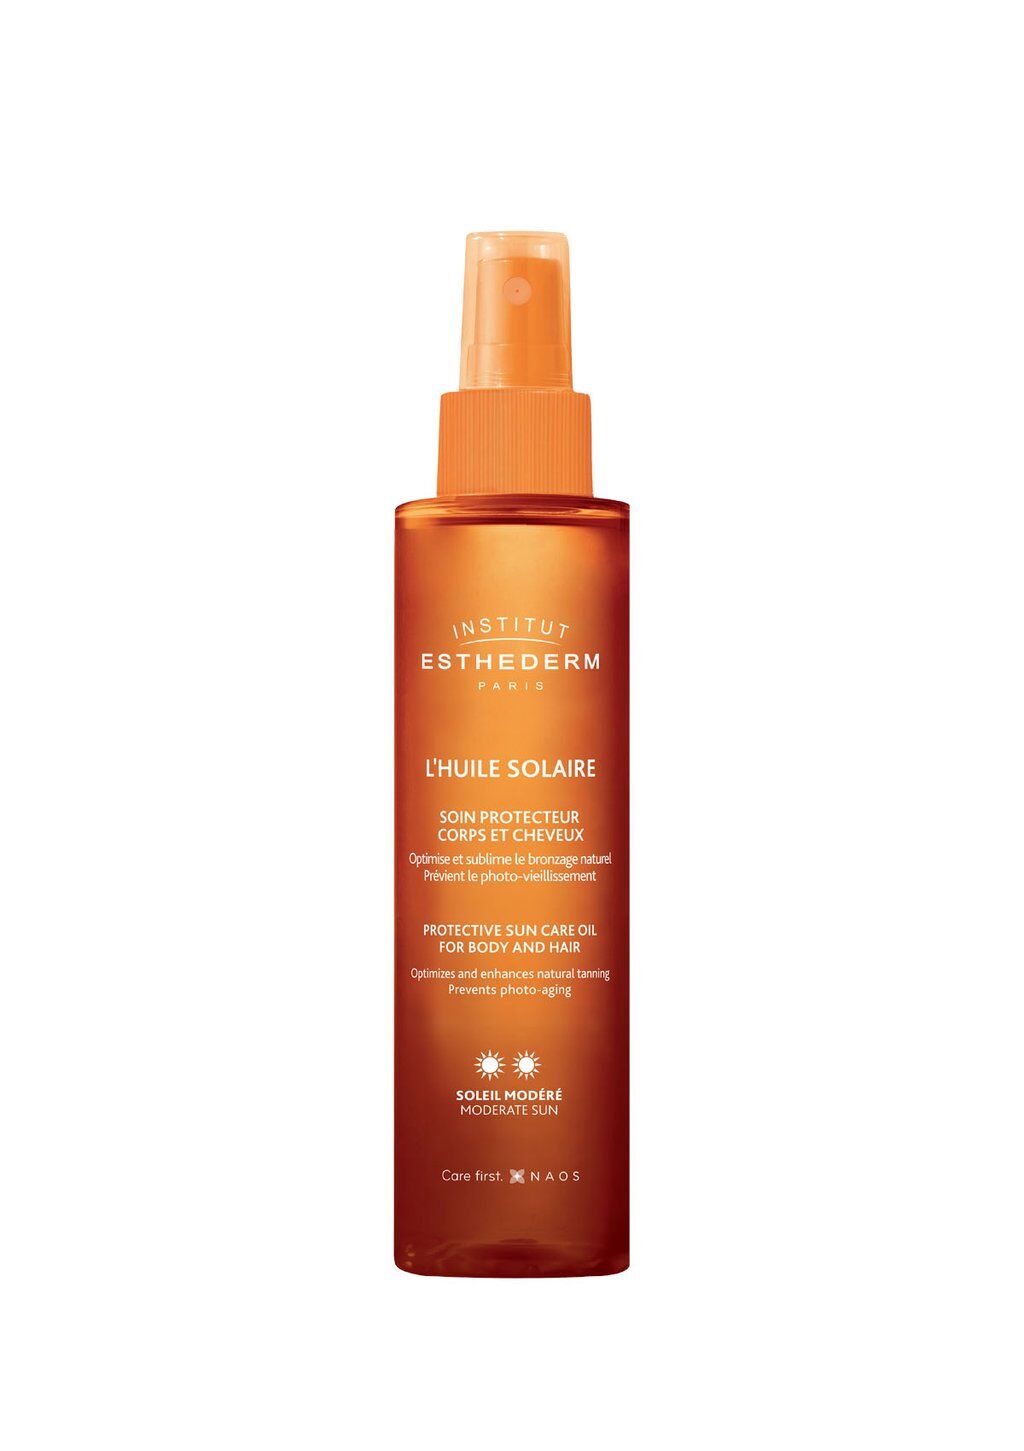 Institut Esthederm - PROTECTIVE SUNCARE OIL FOR BODY AND HAIR - MODERATE SUN